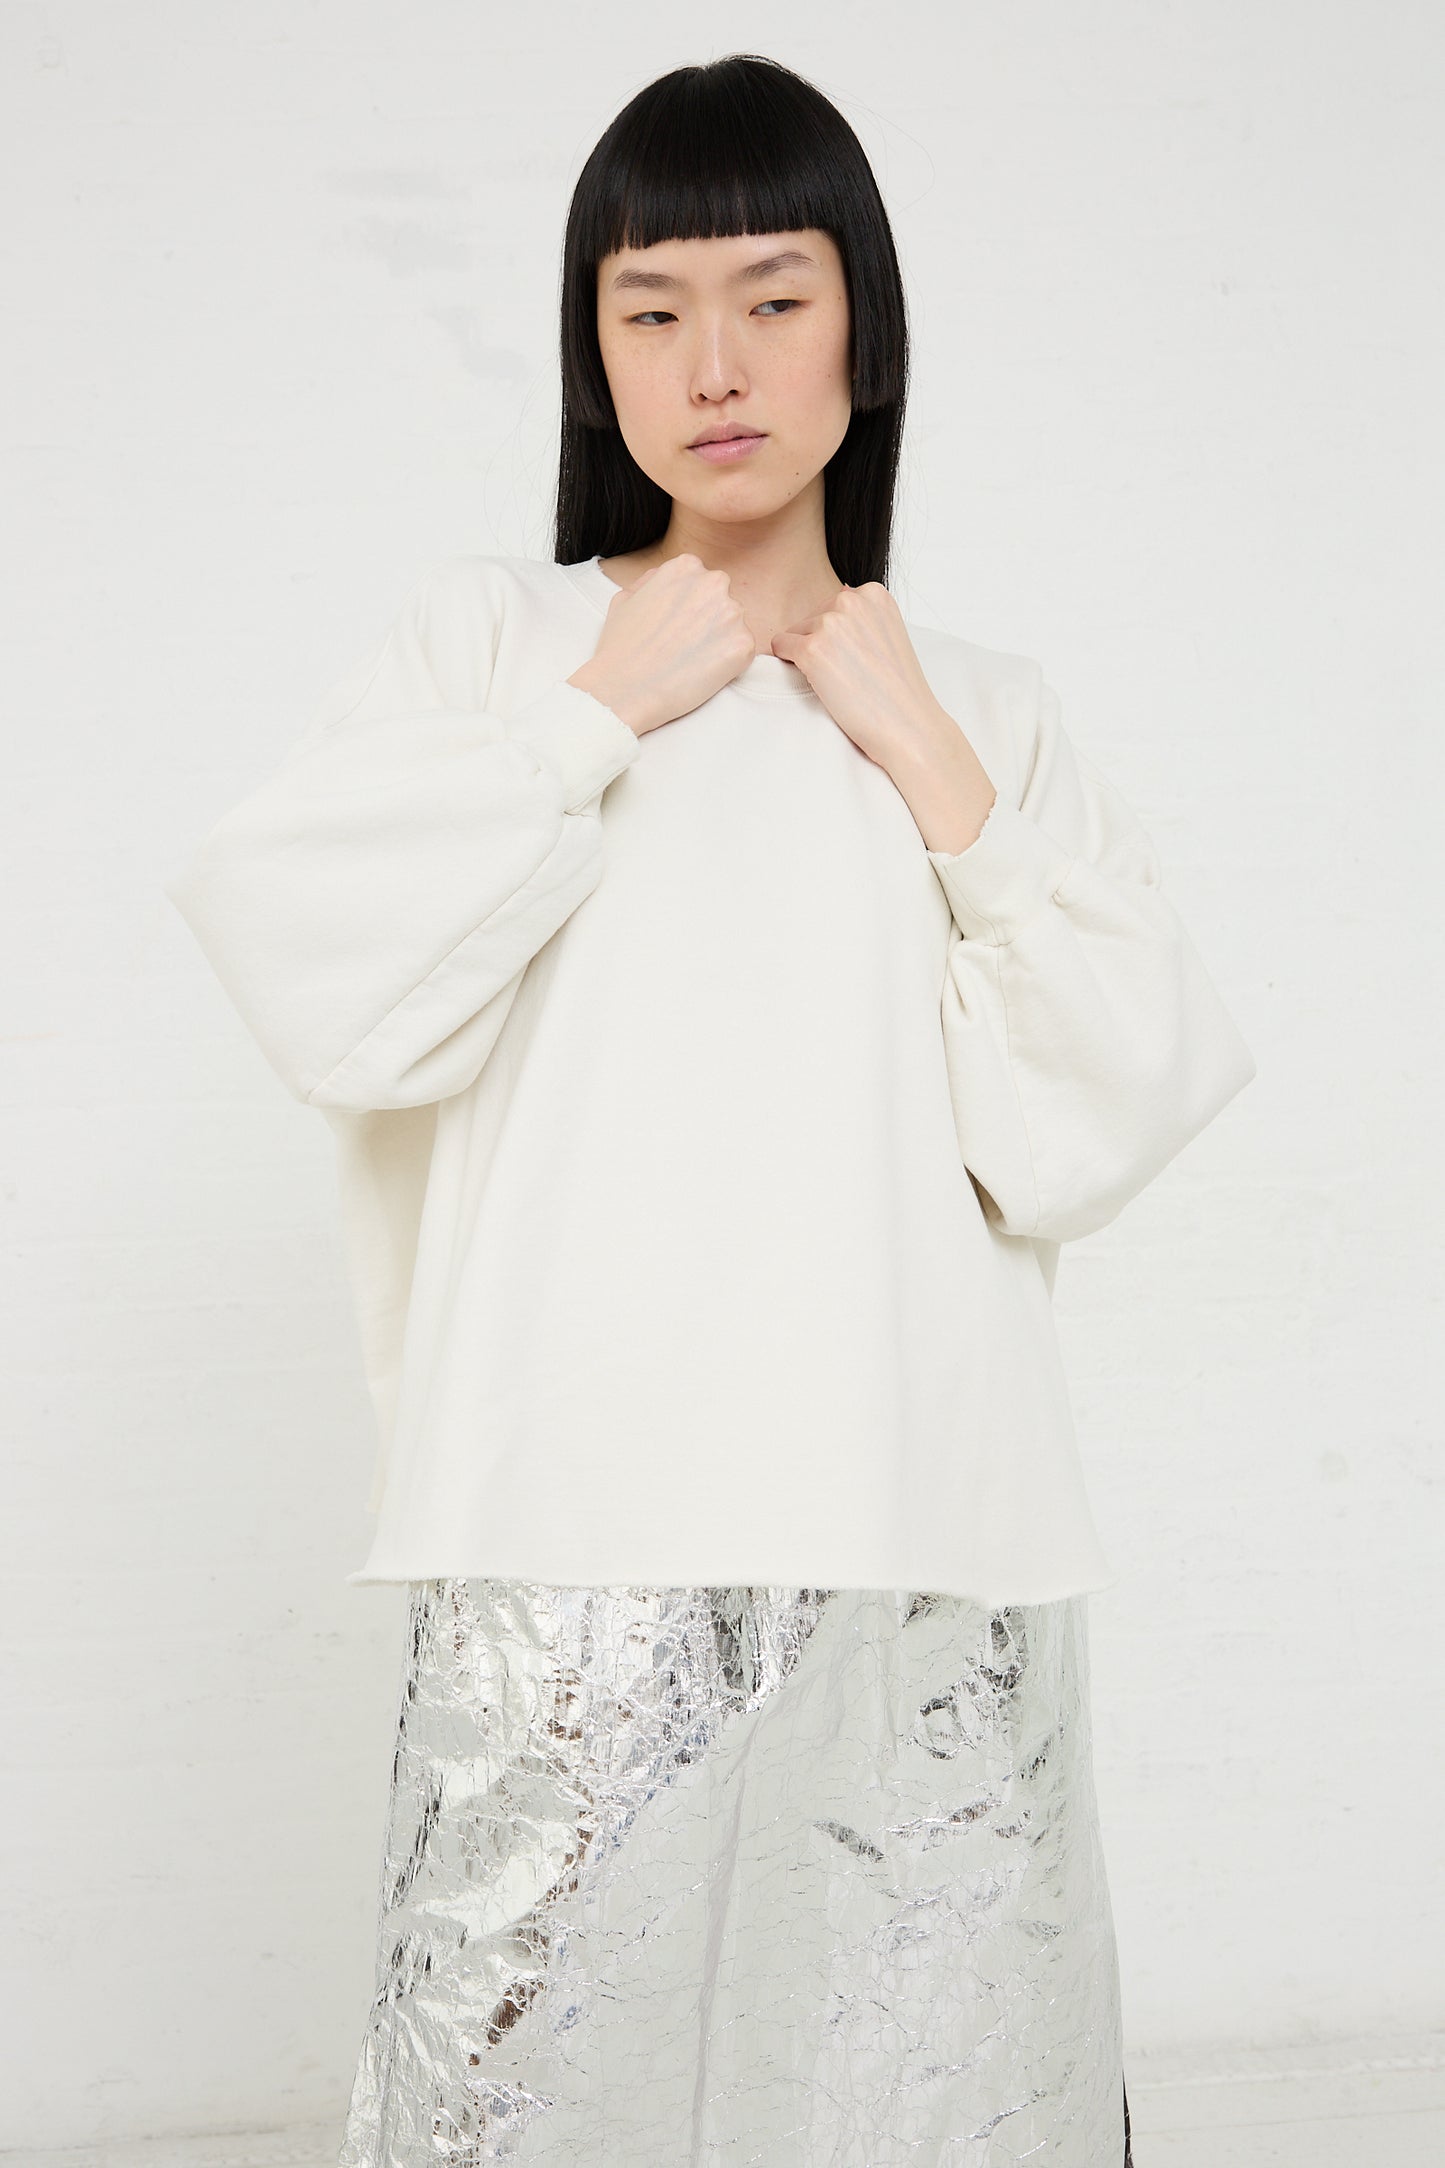 Woman posing in a Rachel Comey Fond Sweatshirt in Dirty White and metallic silver skirt against a white background.